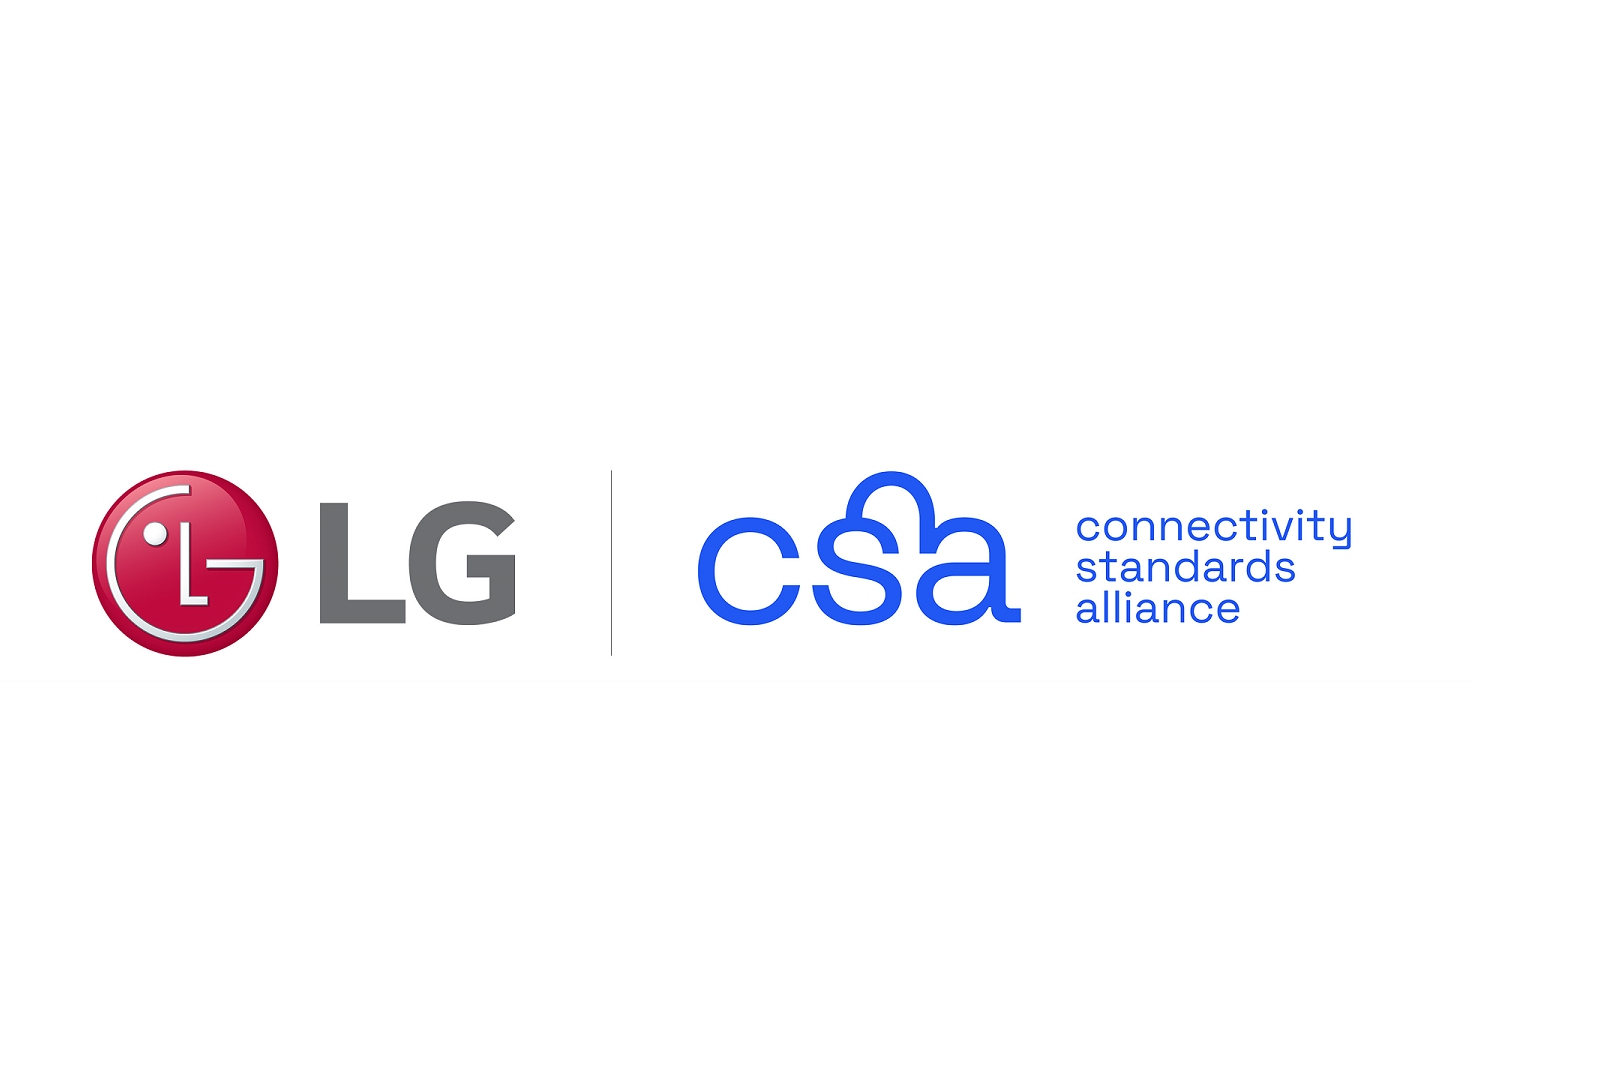 The logo of LG and Connectivity Standards Alliance